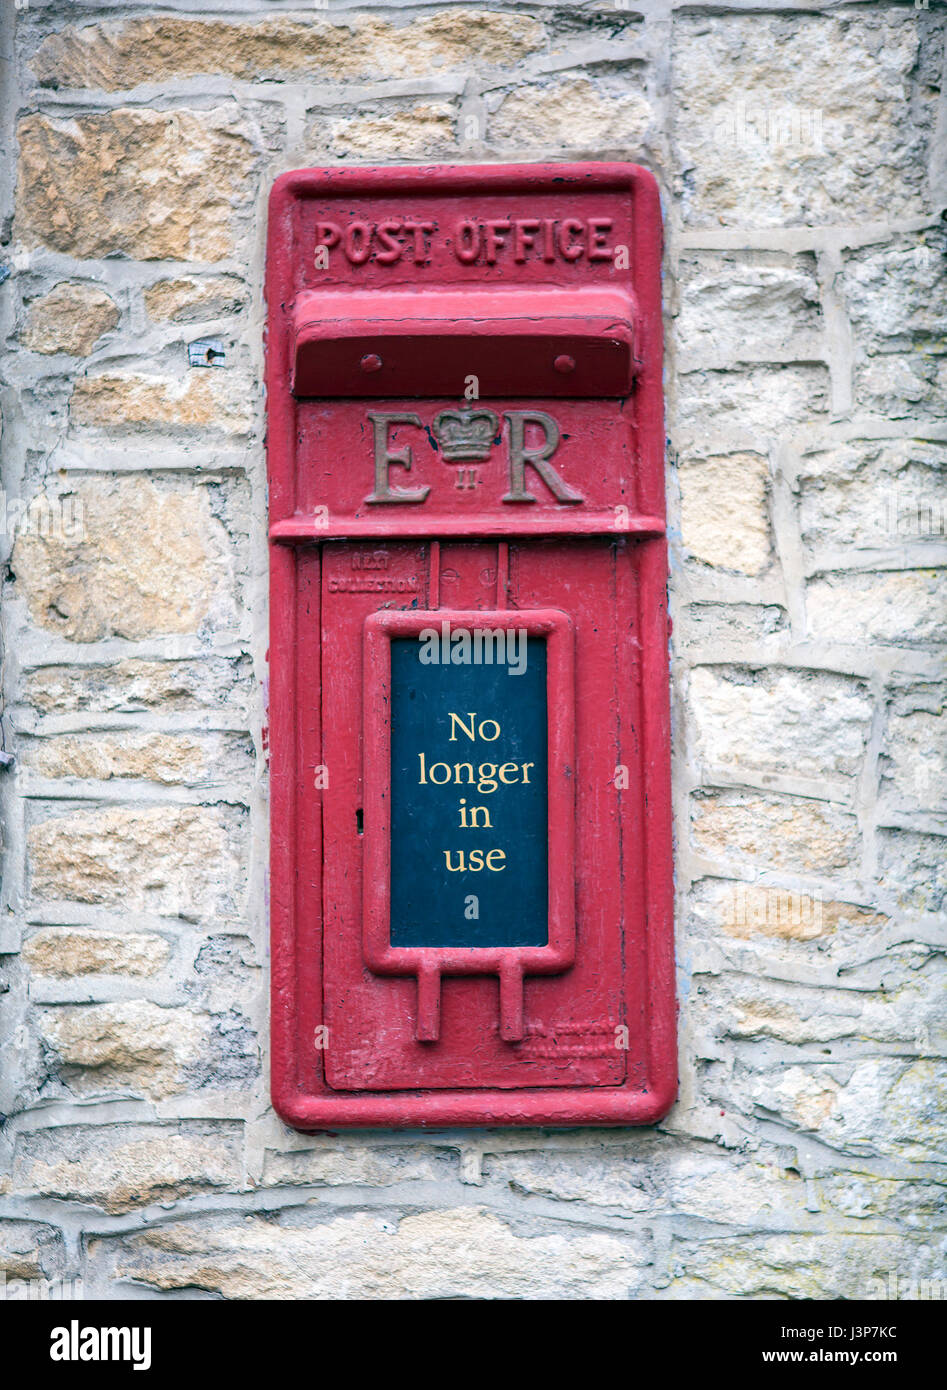 CASTLE COMBE, UK - MAY 5, 2017: Main street in Castle Combe, Wiltshire, UK,  showing old disused post office box Stock Photo